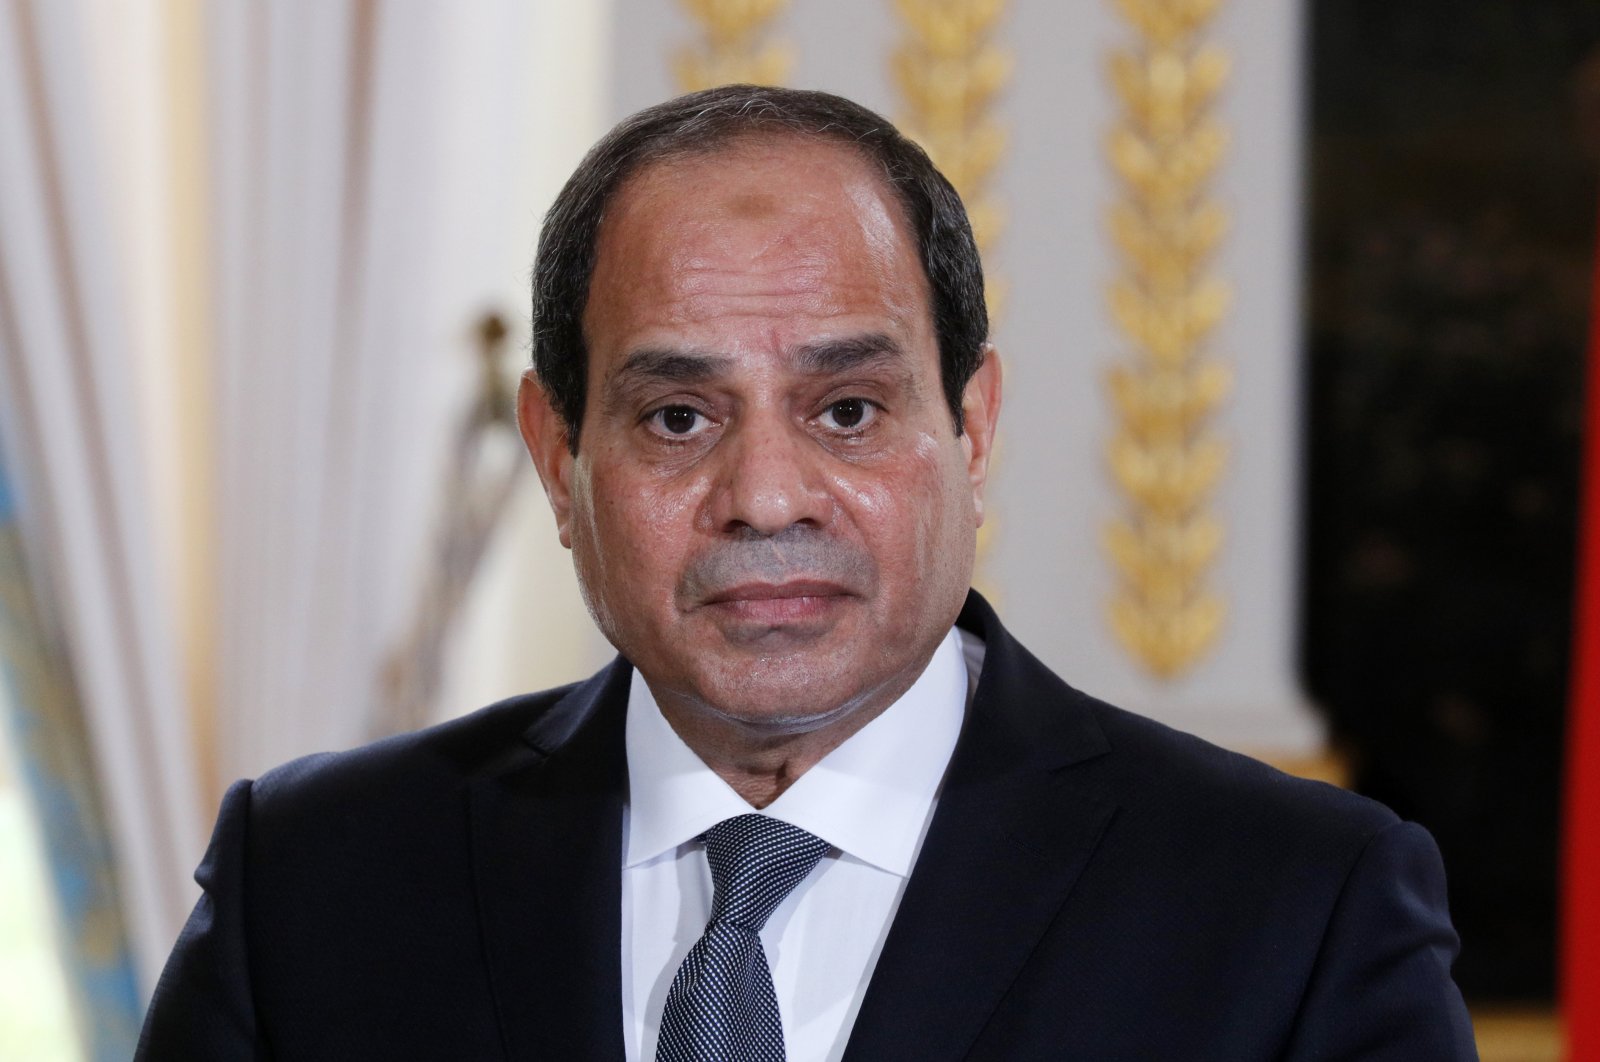 Abdel Fattah el-Sissi attends a news conference with French President Emmanuel Macron (not pictured) at the Elysee Palace, in Paris, France, 24 October 2017. (EPA Photo)